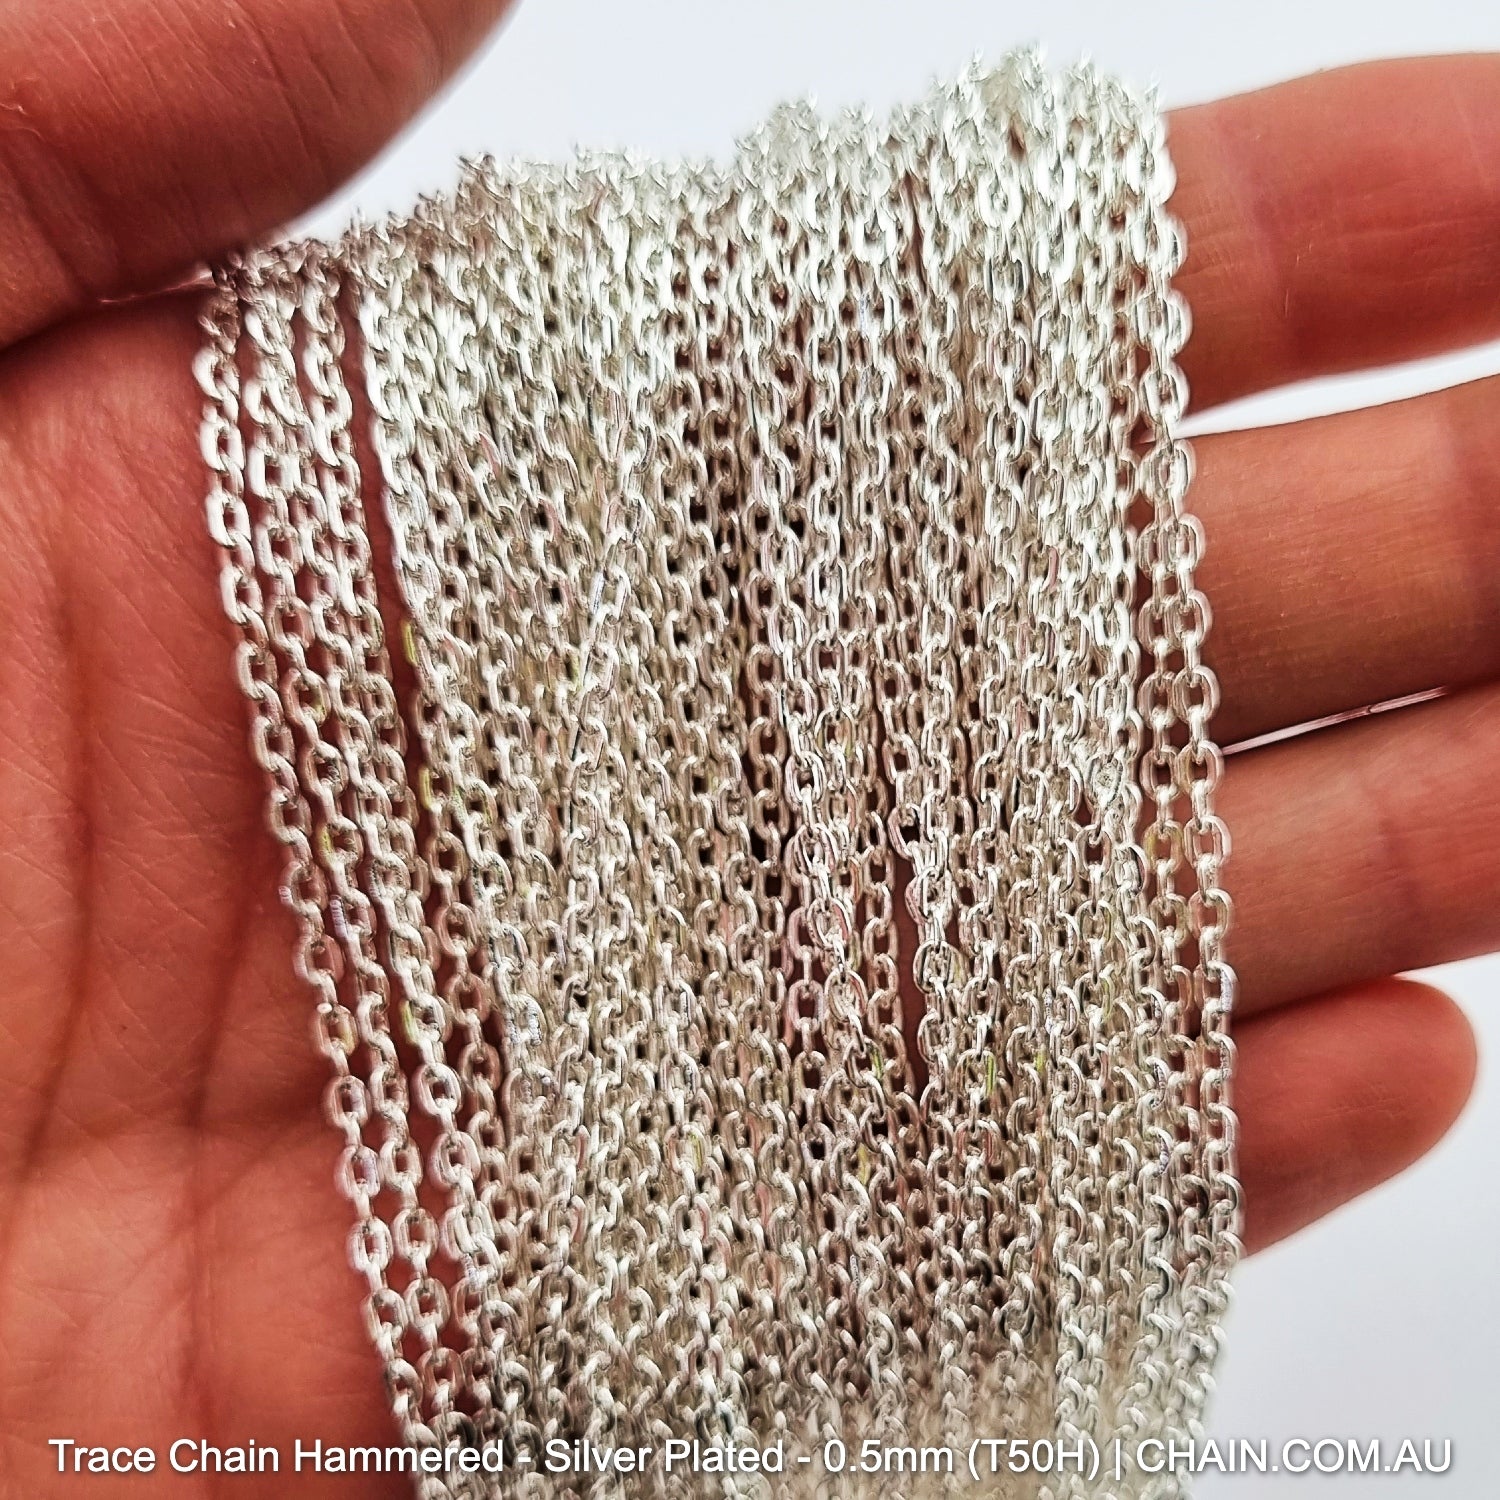 Hammered Trace Chain in a Silver Plated Finish. Size: 0.5mm, T50H. Jewellery Chain, Australia wide shipping. Shop chain.com.au